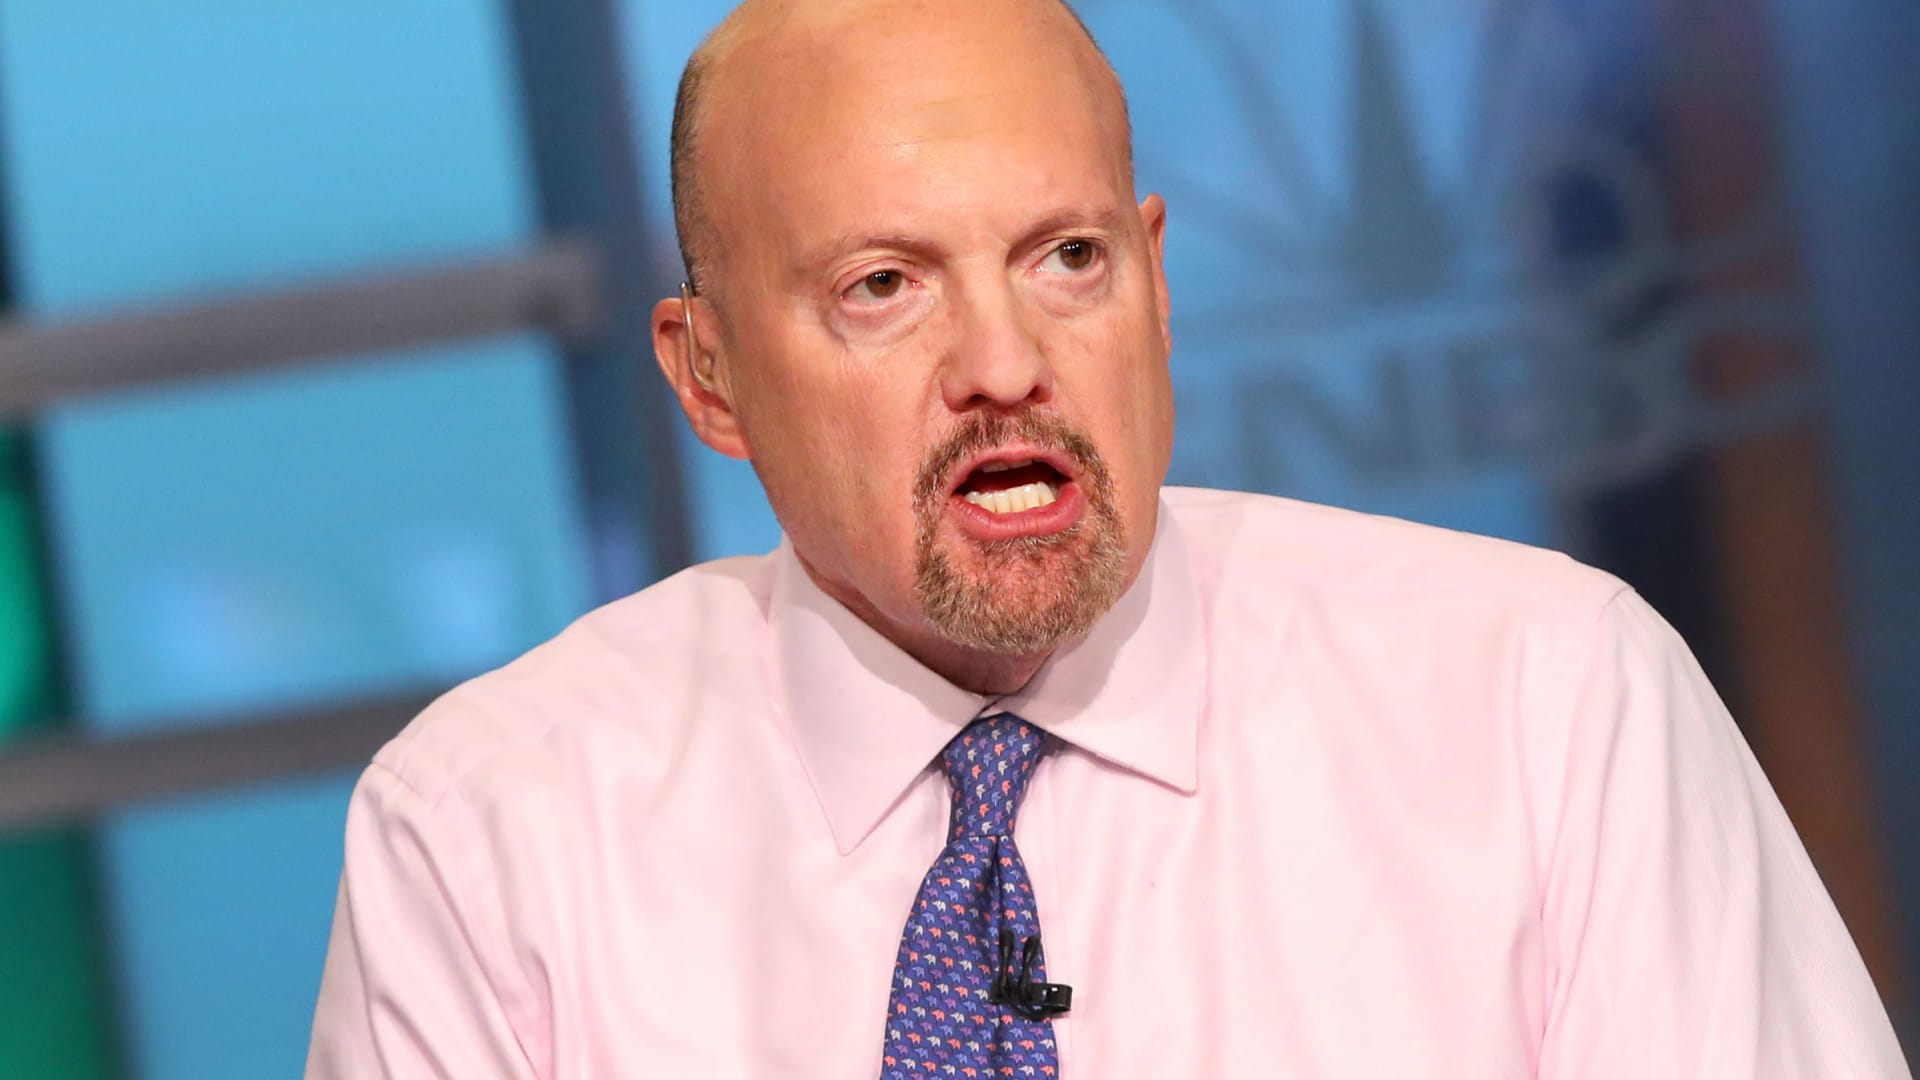 Jim Cramer’s Investing Club meeting Tuesday: Inflation cools, stock trim, Eli Lilly